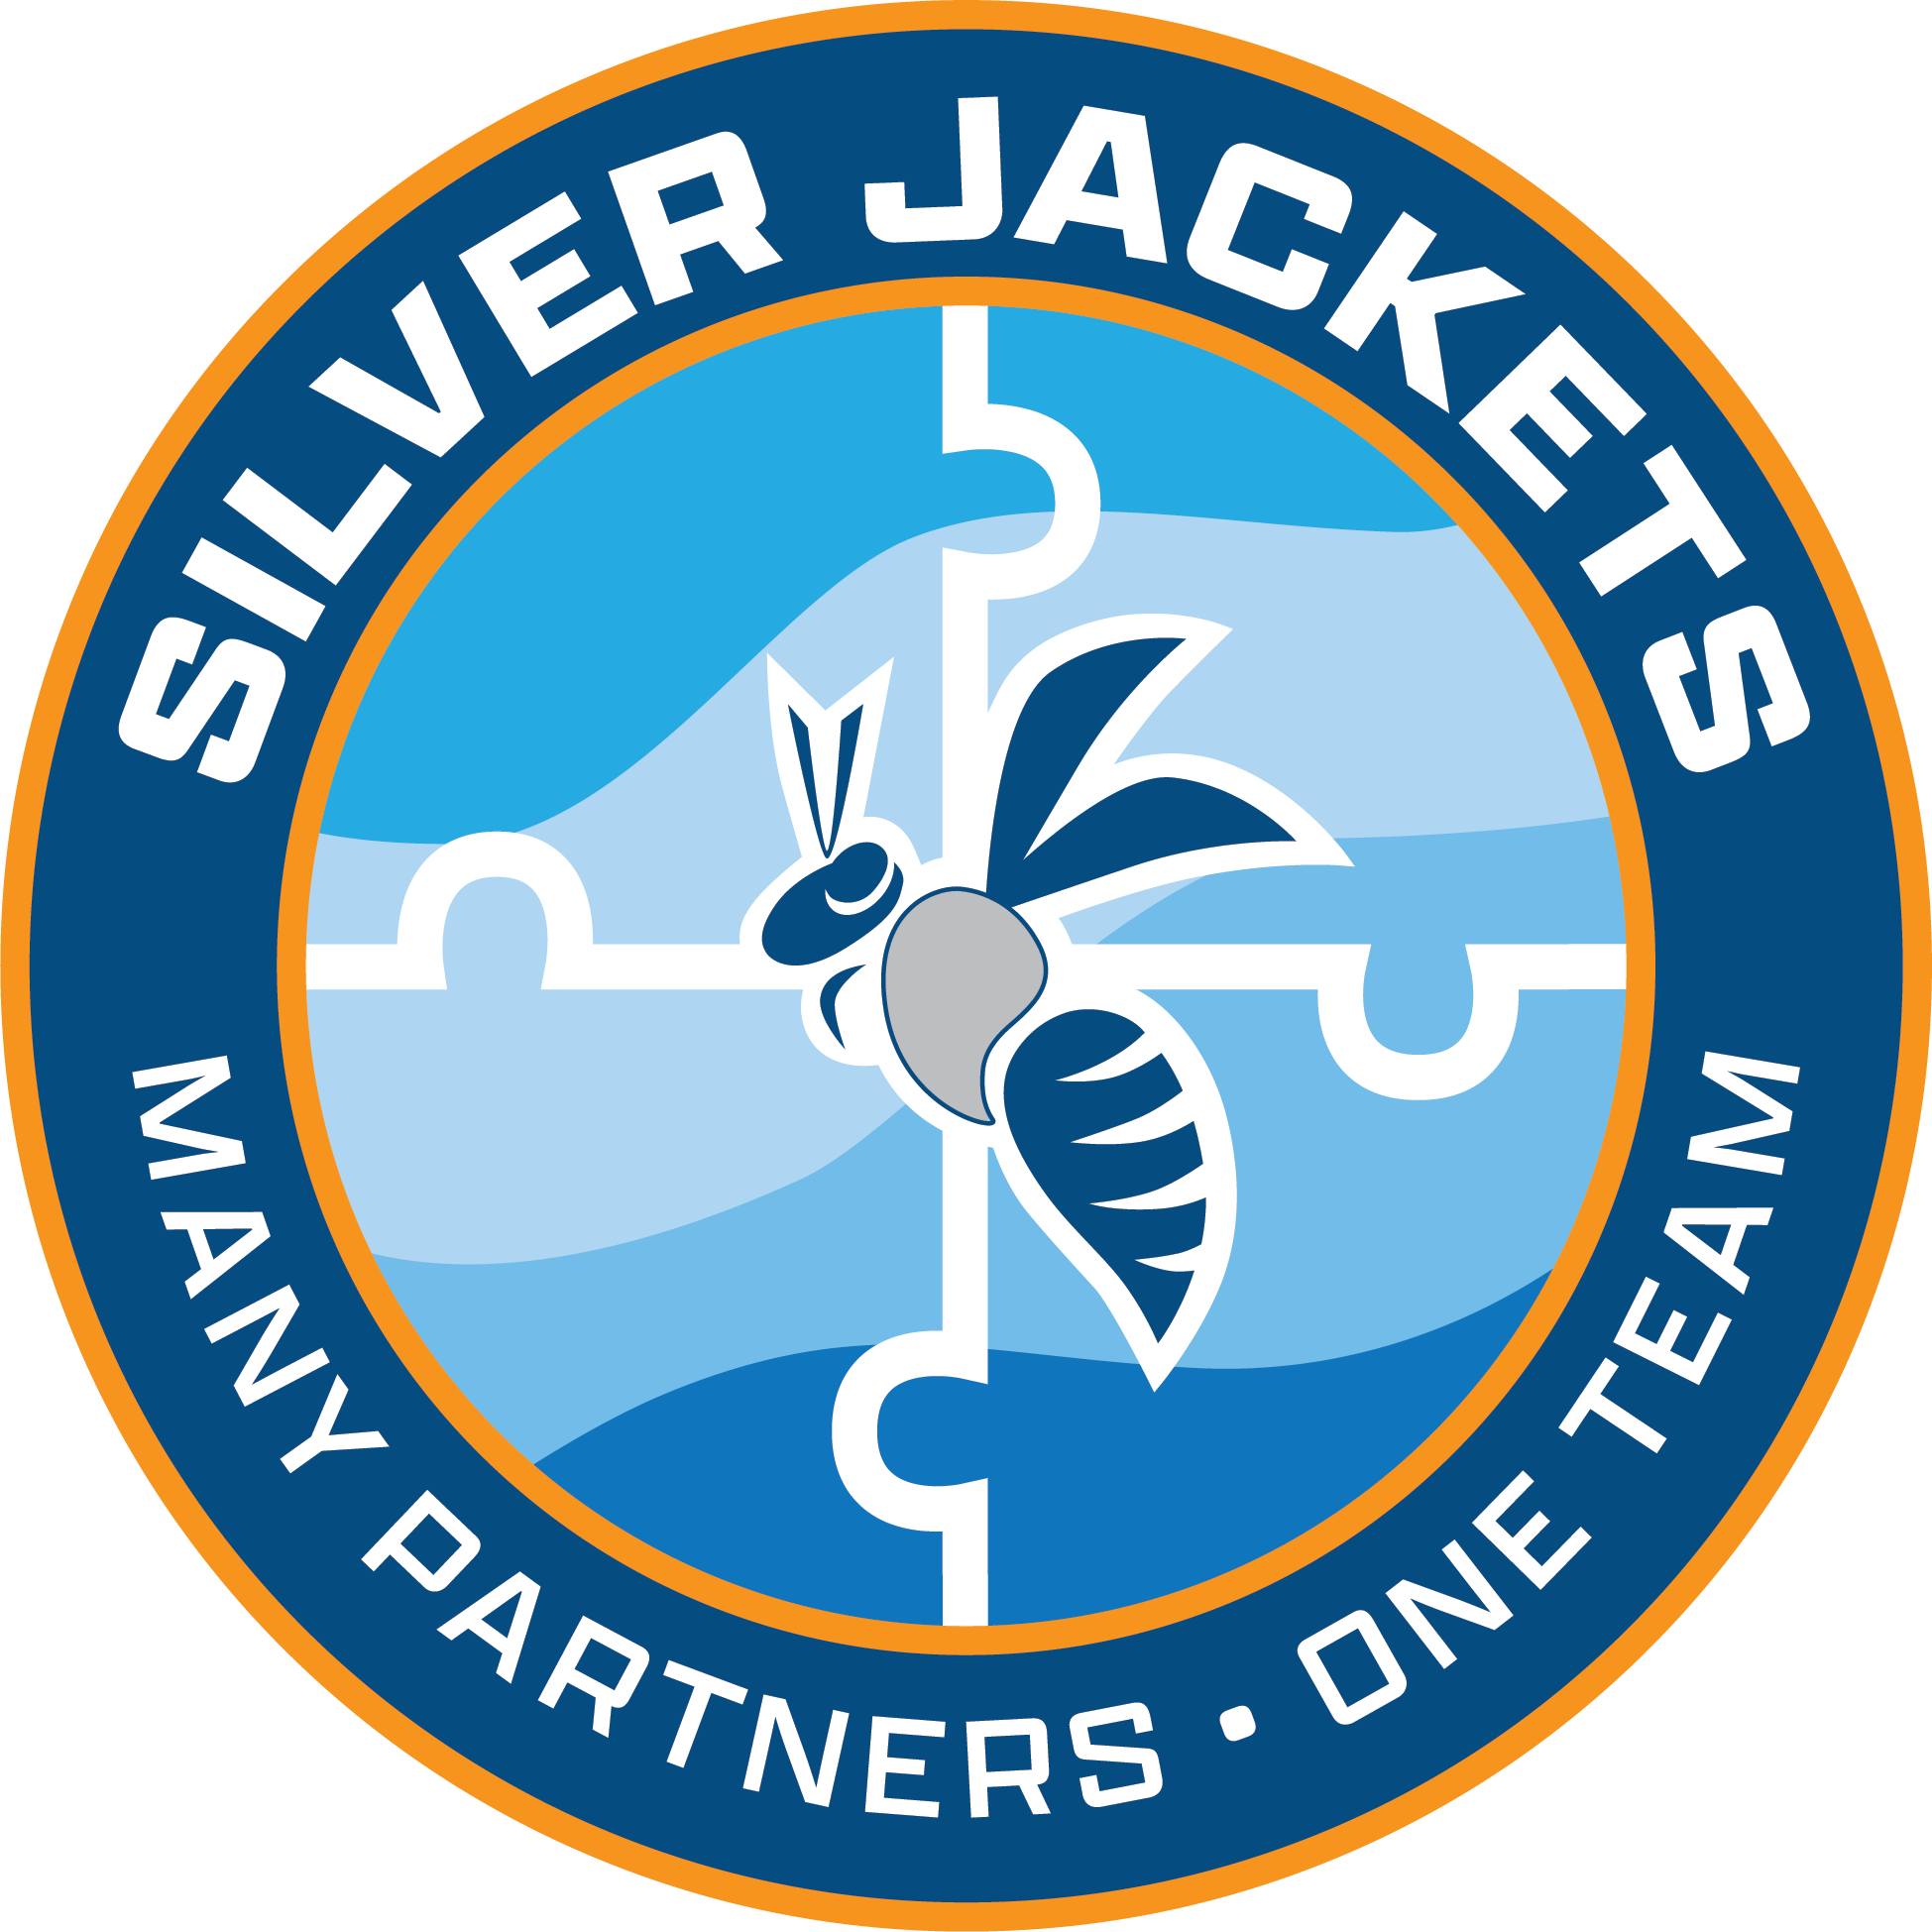 Project was funded by Silver Jackets in cooperation with Federal State State/Local Partners.